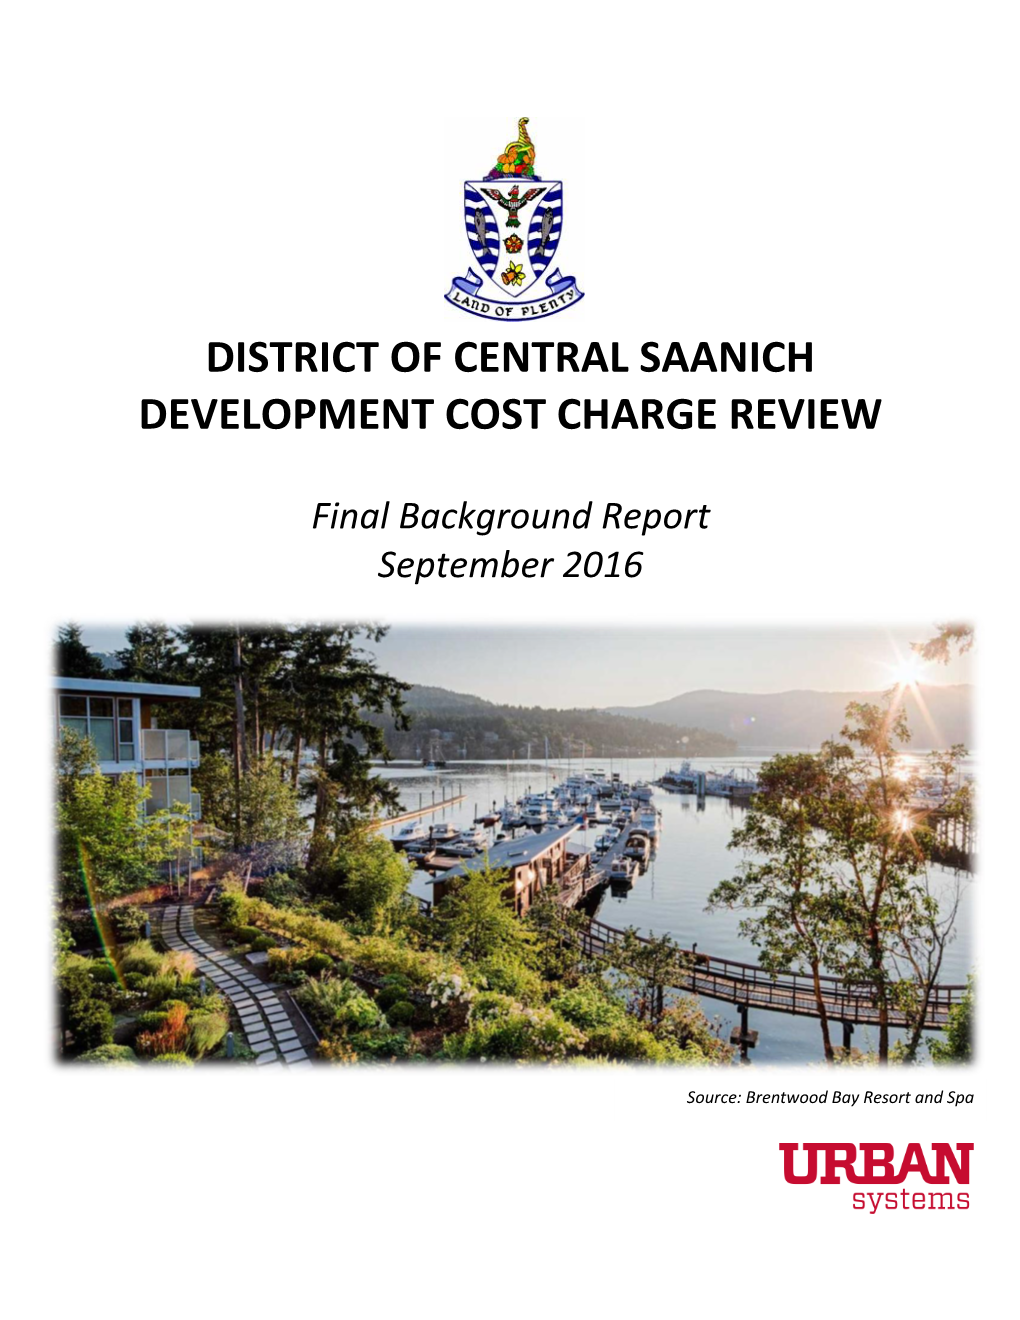 District of Central Saanich Development Cost Charge Review